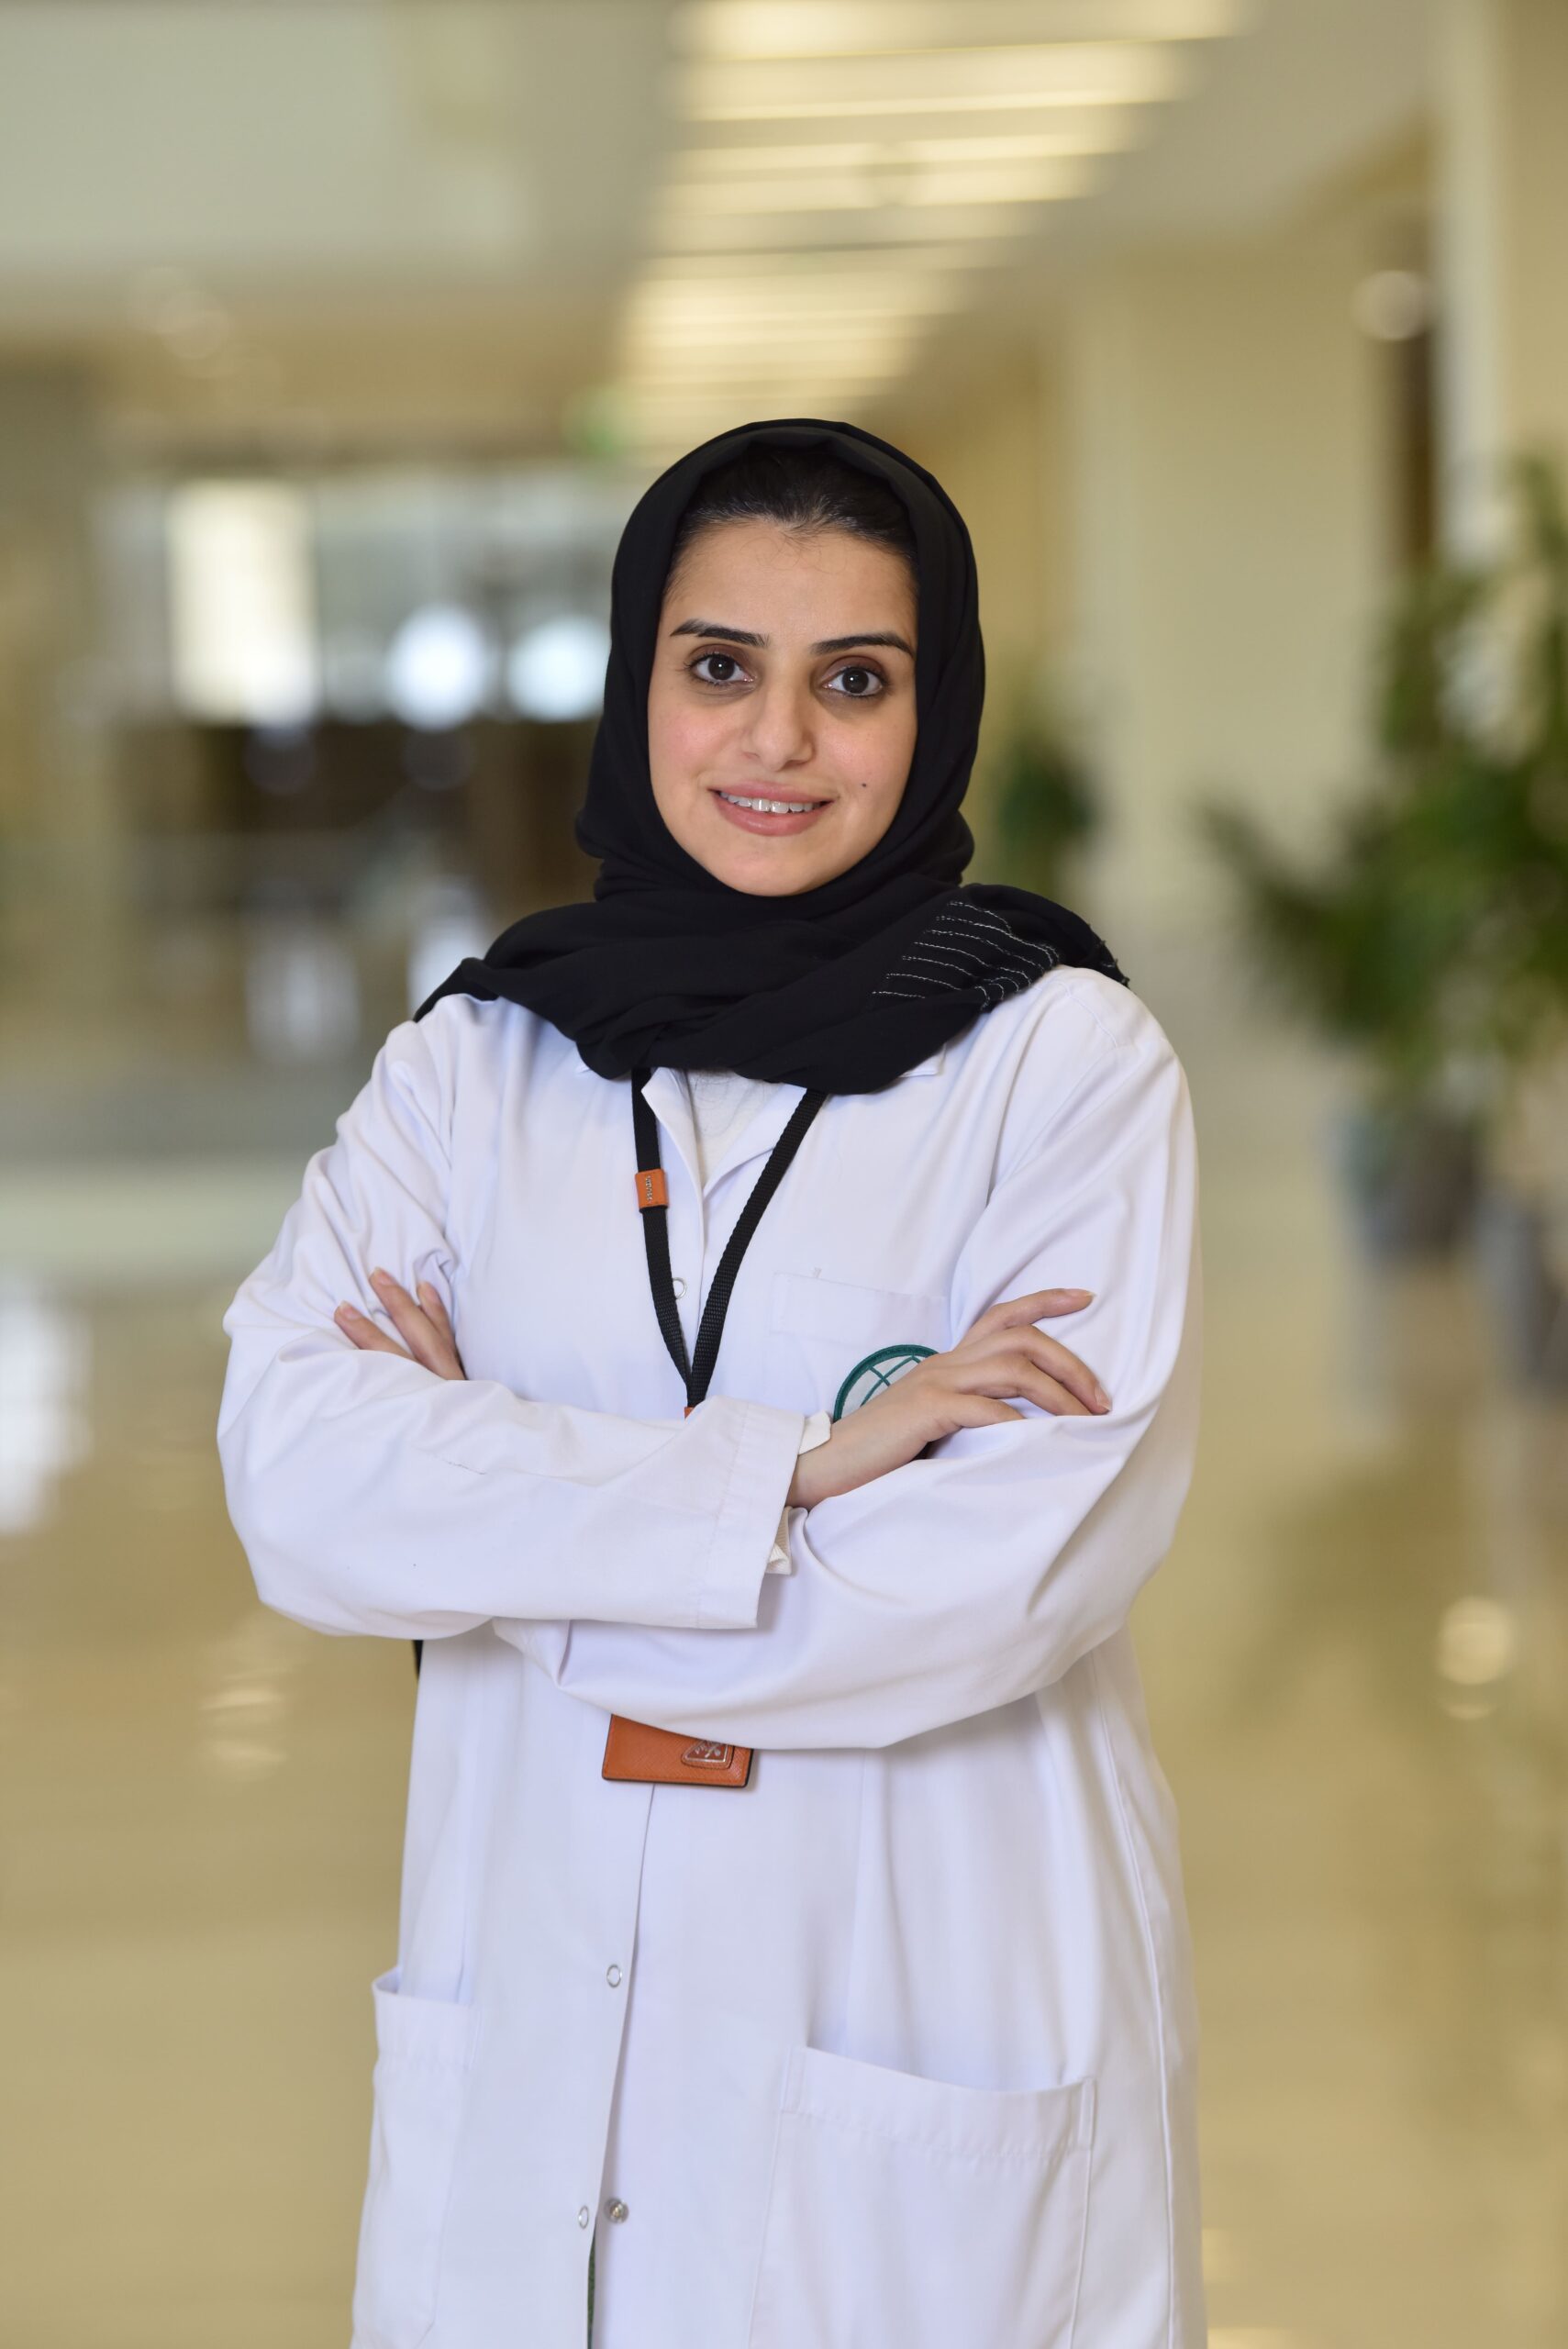 Tissue Banking, a promising service for the Kingdom of Saudi Arabia